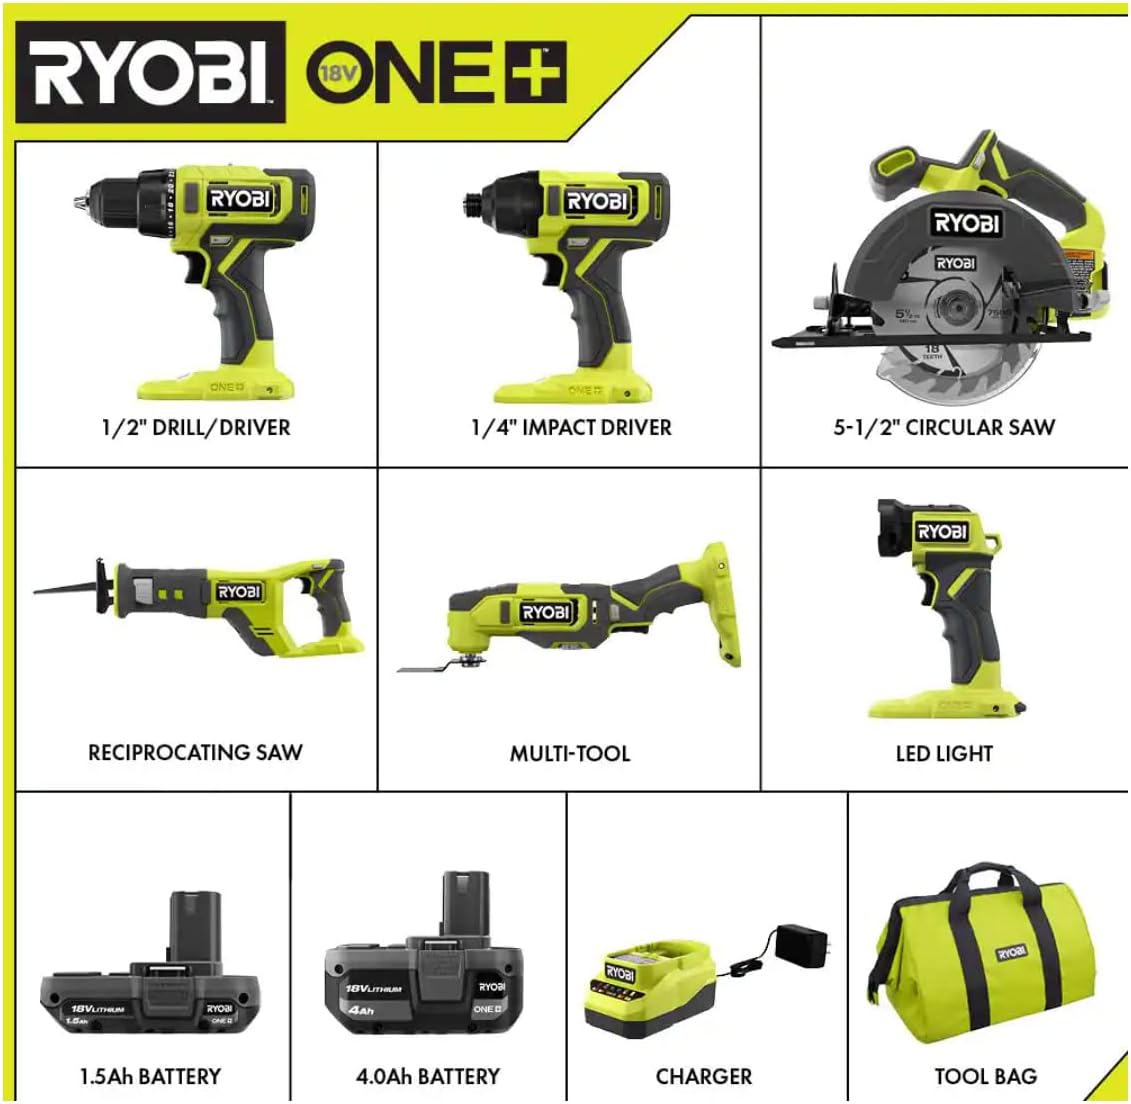 Ryobi One+ Pcl1600K2 18V Cordless 6-Tool Combo Kit With 1.5 Ah Battery, 4.0 Ah Battery, And Charger